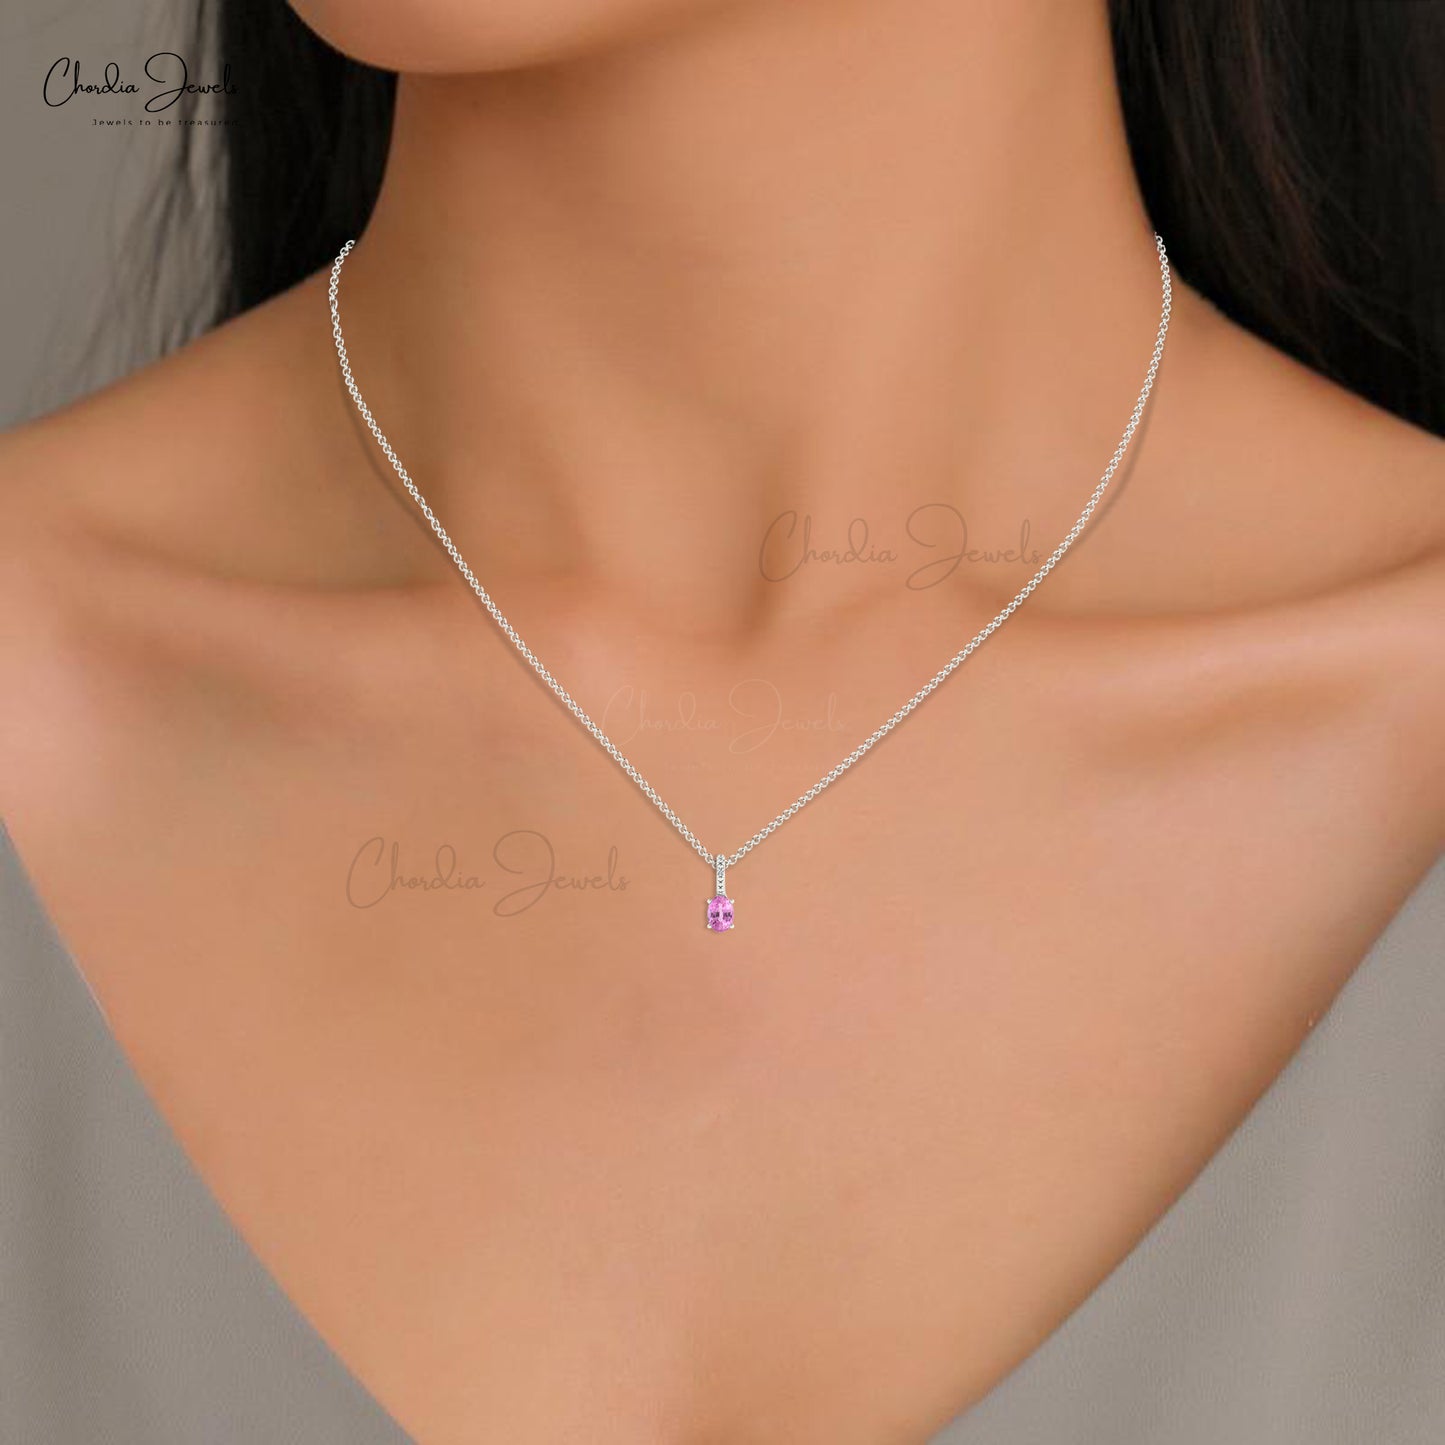 Hot Sale Cute Design 14k Real Gold Hidden Bail Pendant Natural White Diamond and Pink Sapphire Gemstone Pendant Necklace Wedding Gift